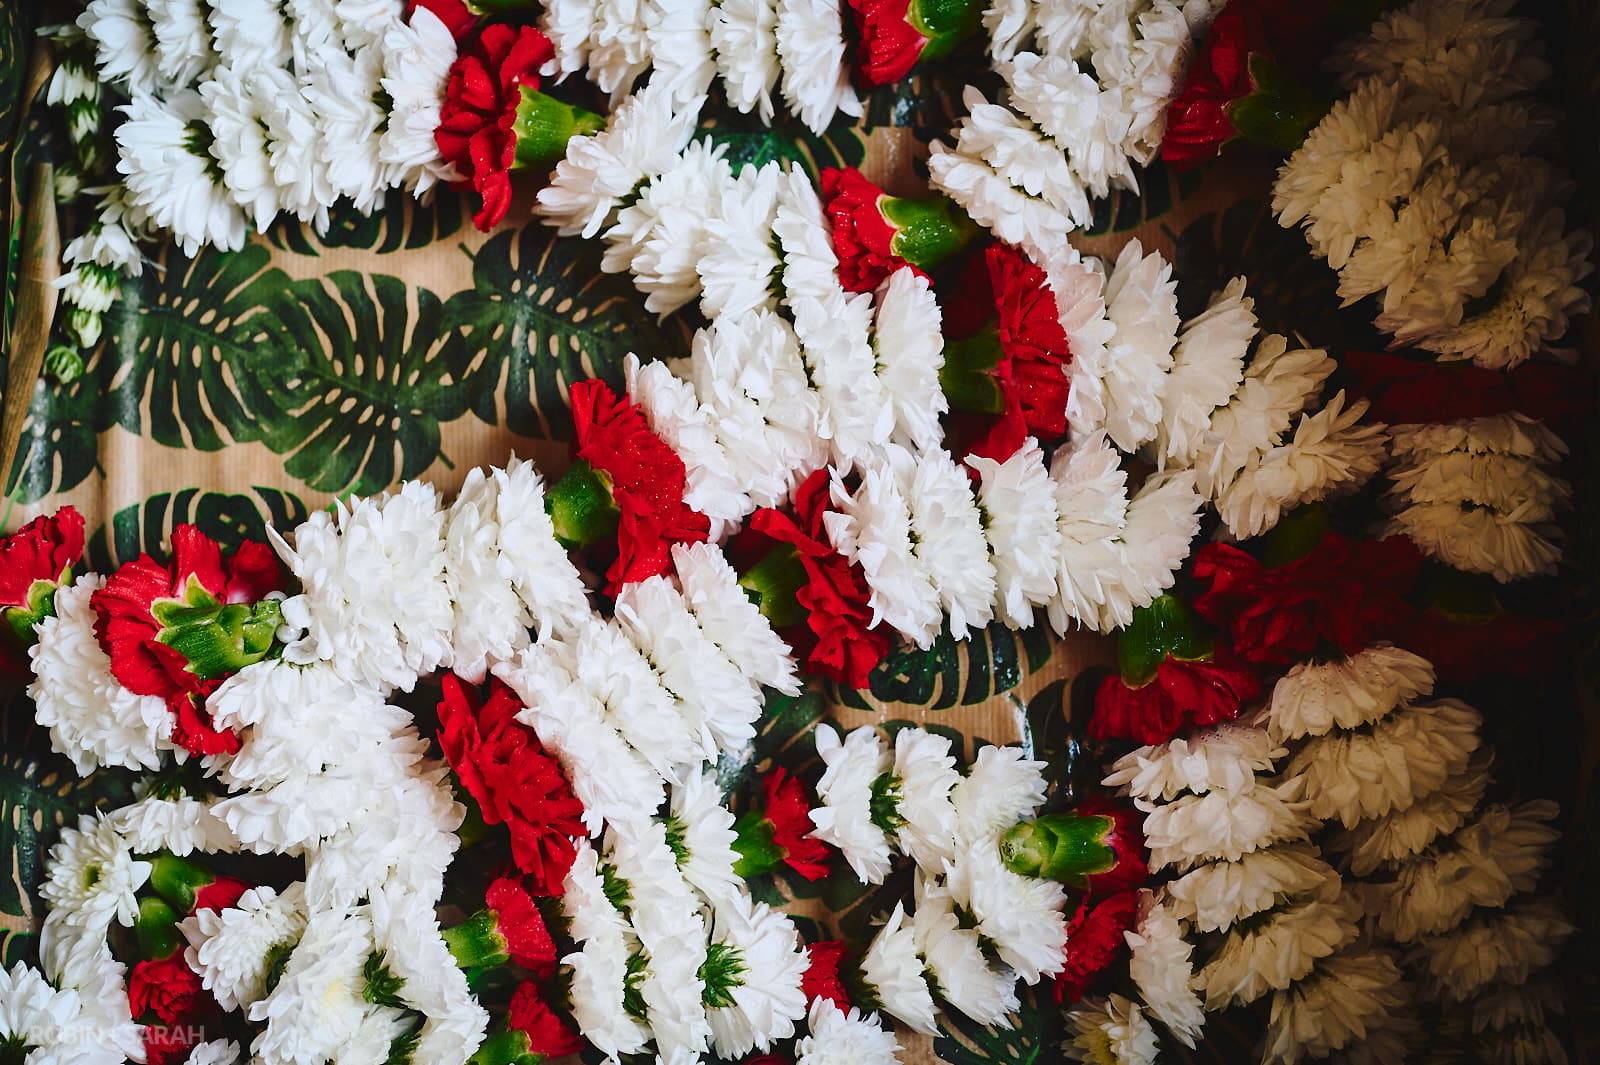 Garlands of red and white Indian wedding flowers